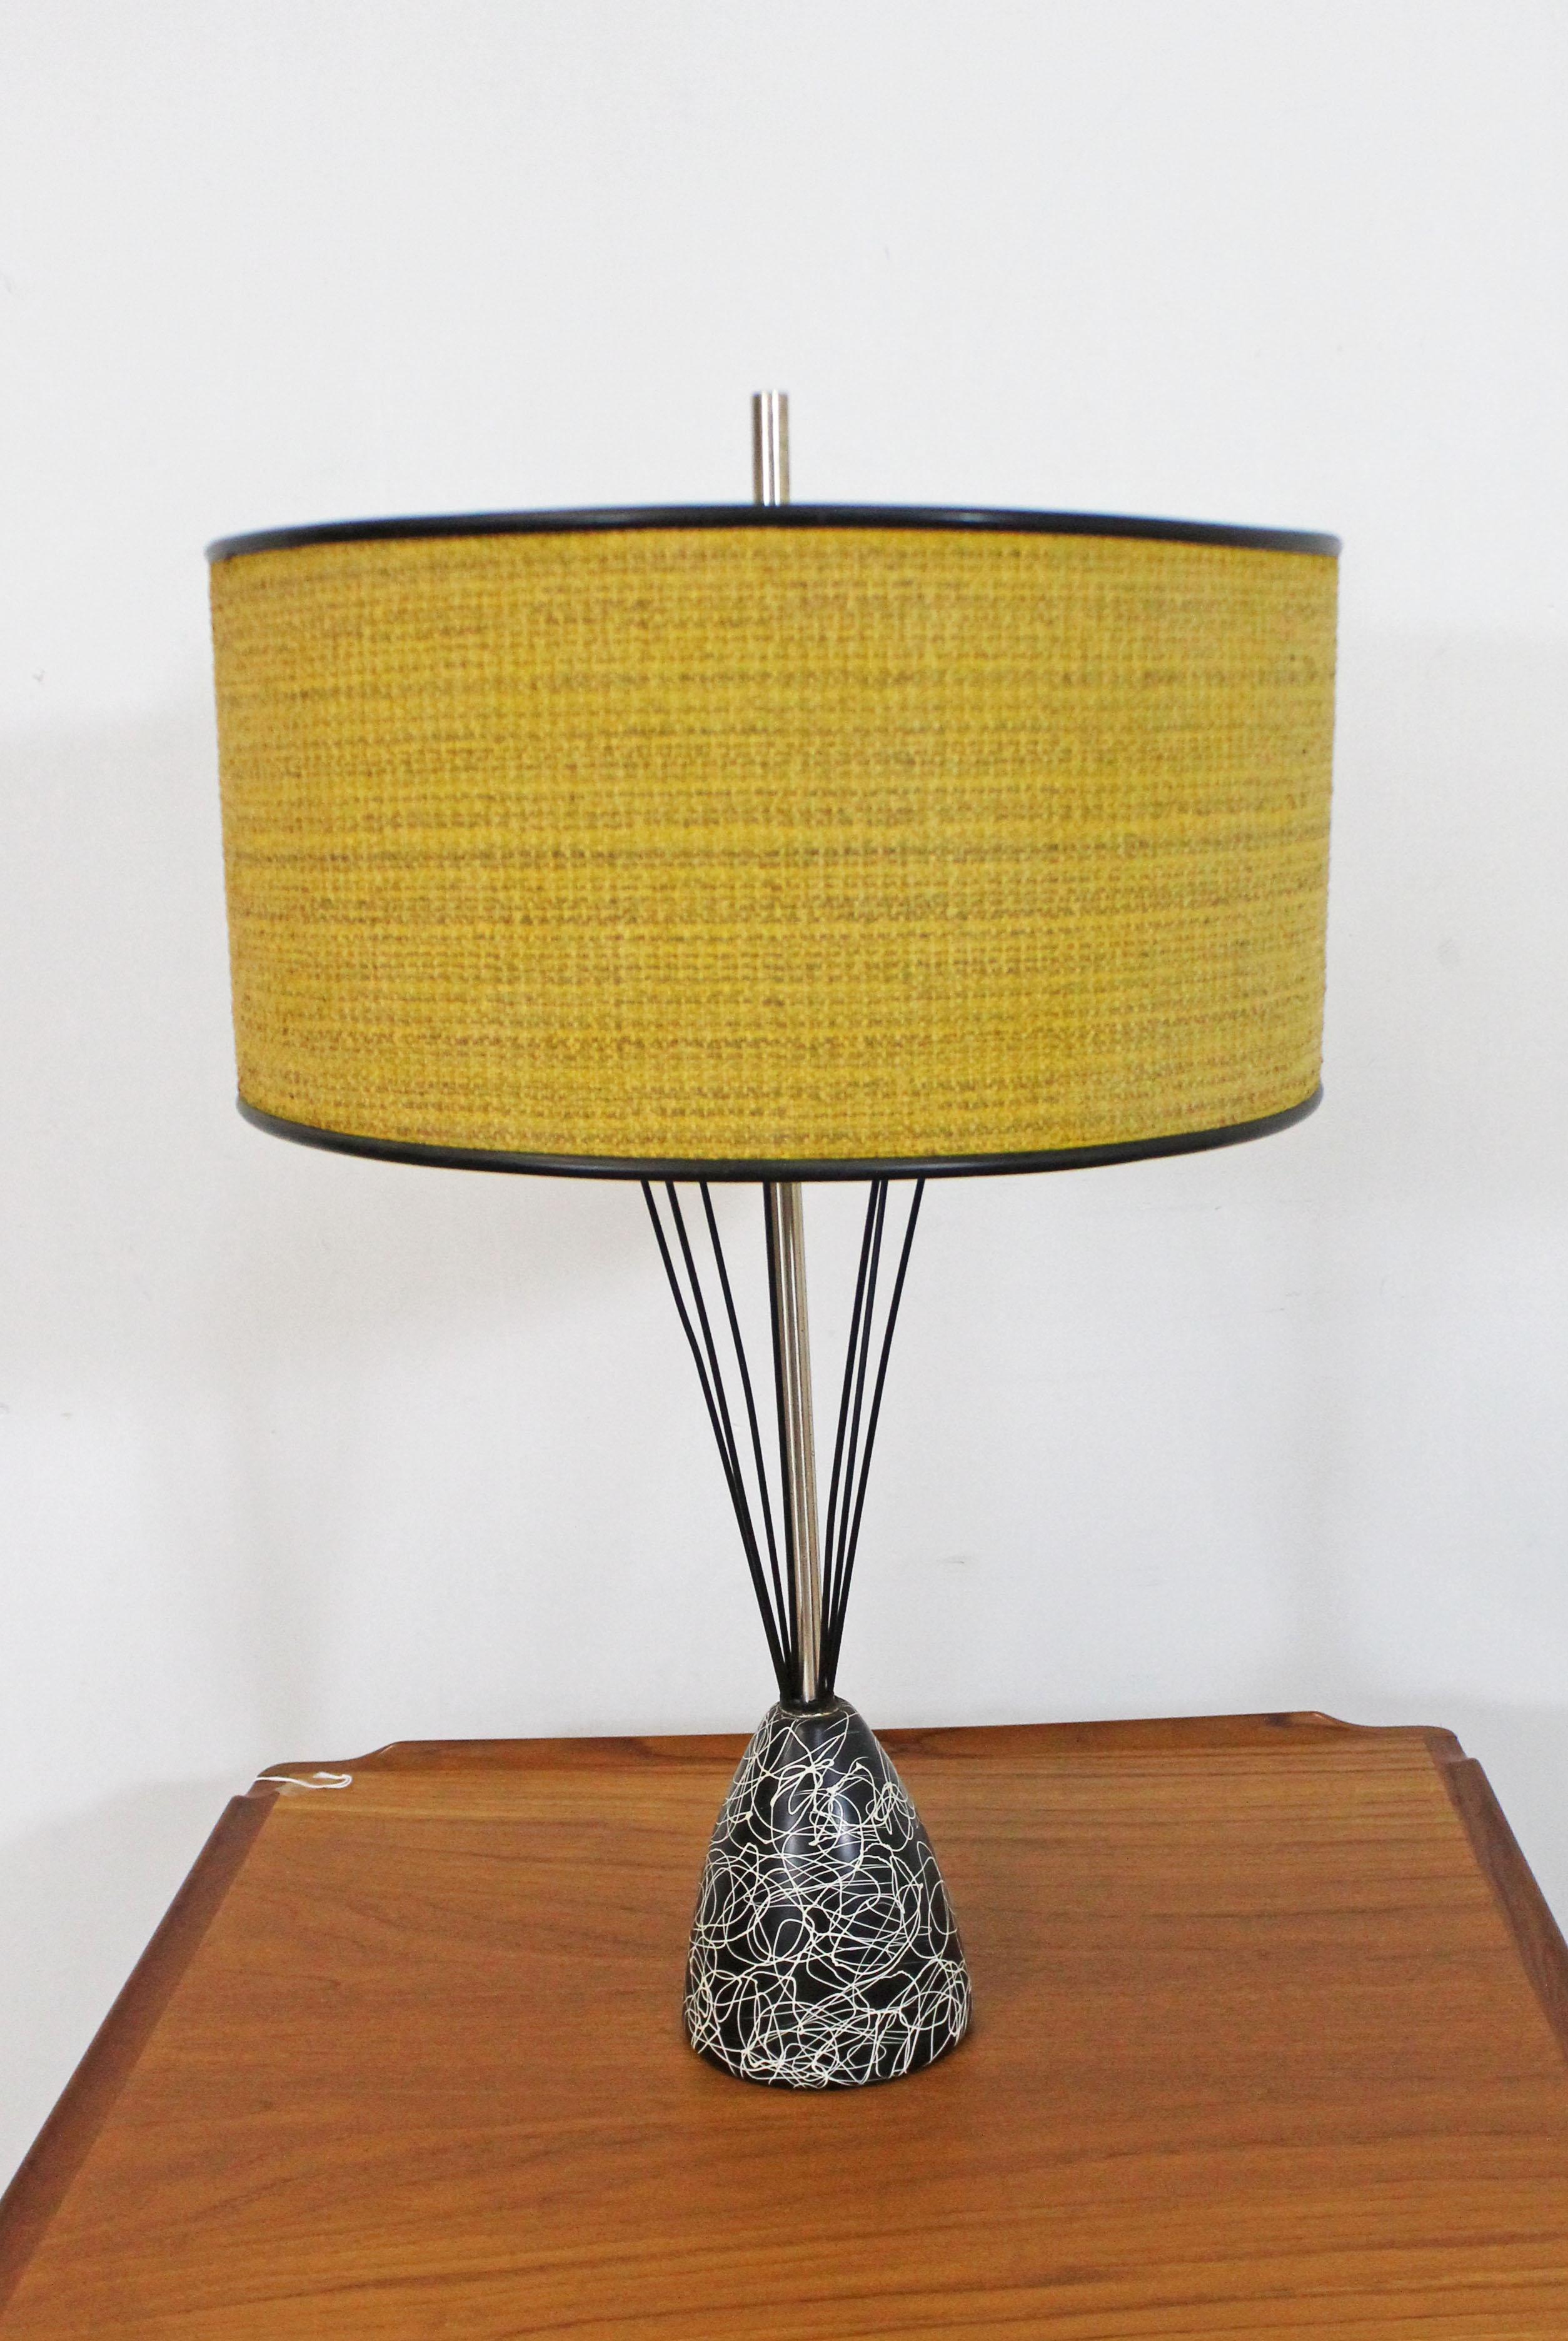 Offered is a one-of-a-kind retro Mid-Century Modern table lamp with a caged wire-base and drum shade. This lamp has a painted metal and wire base. The drum shade sits on a glass shade (see photos). In good, working condition with a short wire. Shows